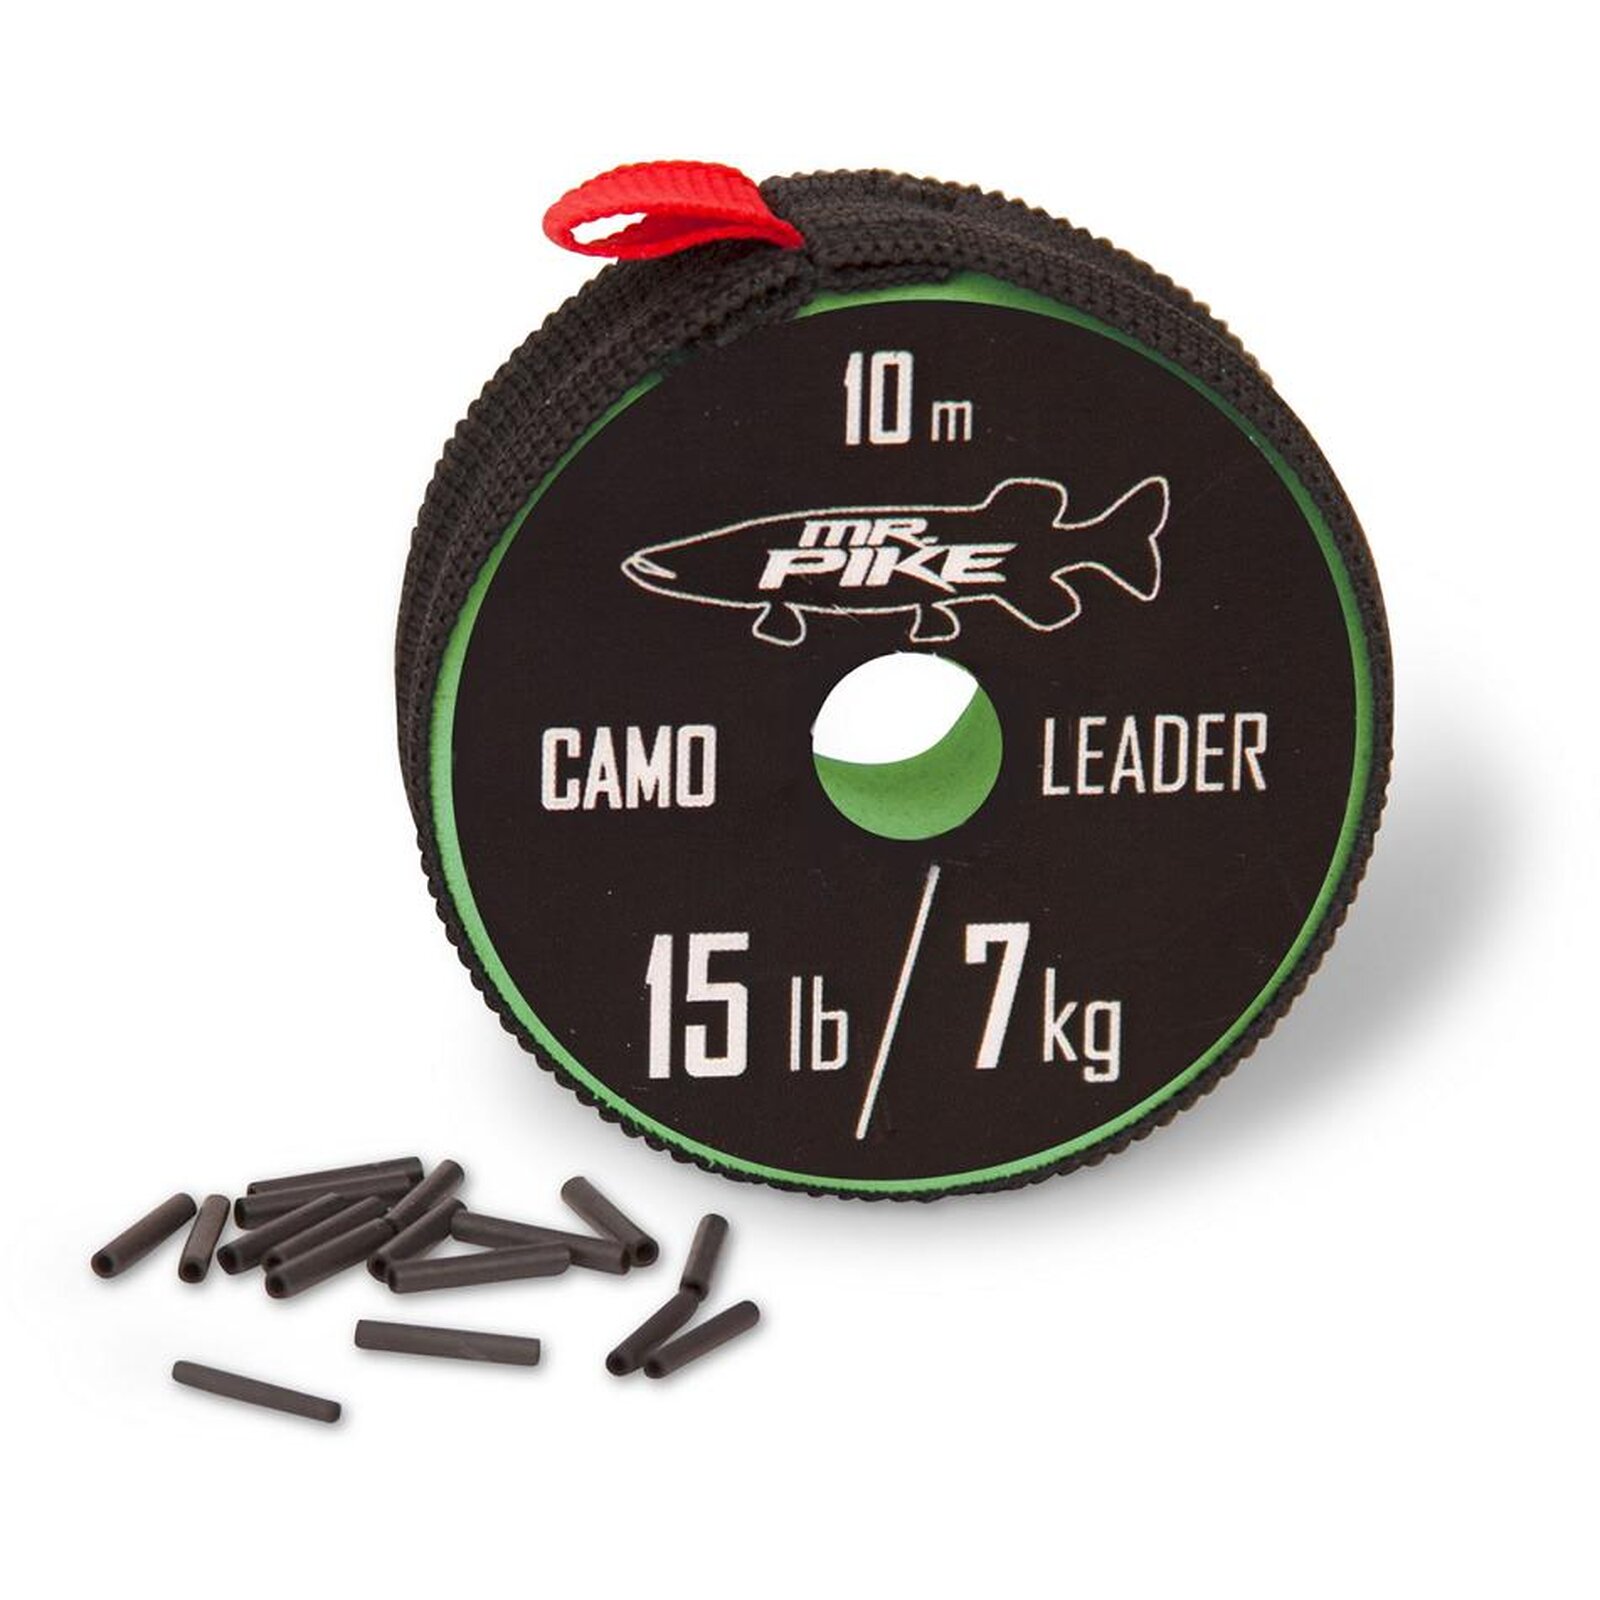 Mr. Pike Camo Coated Leader Material 10m